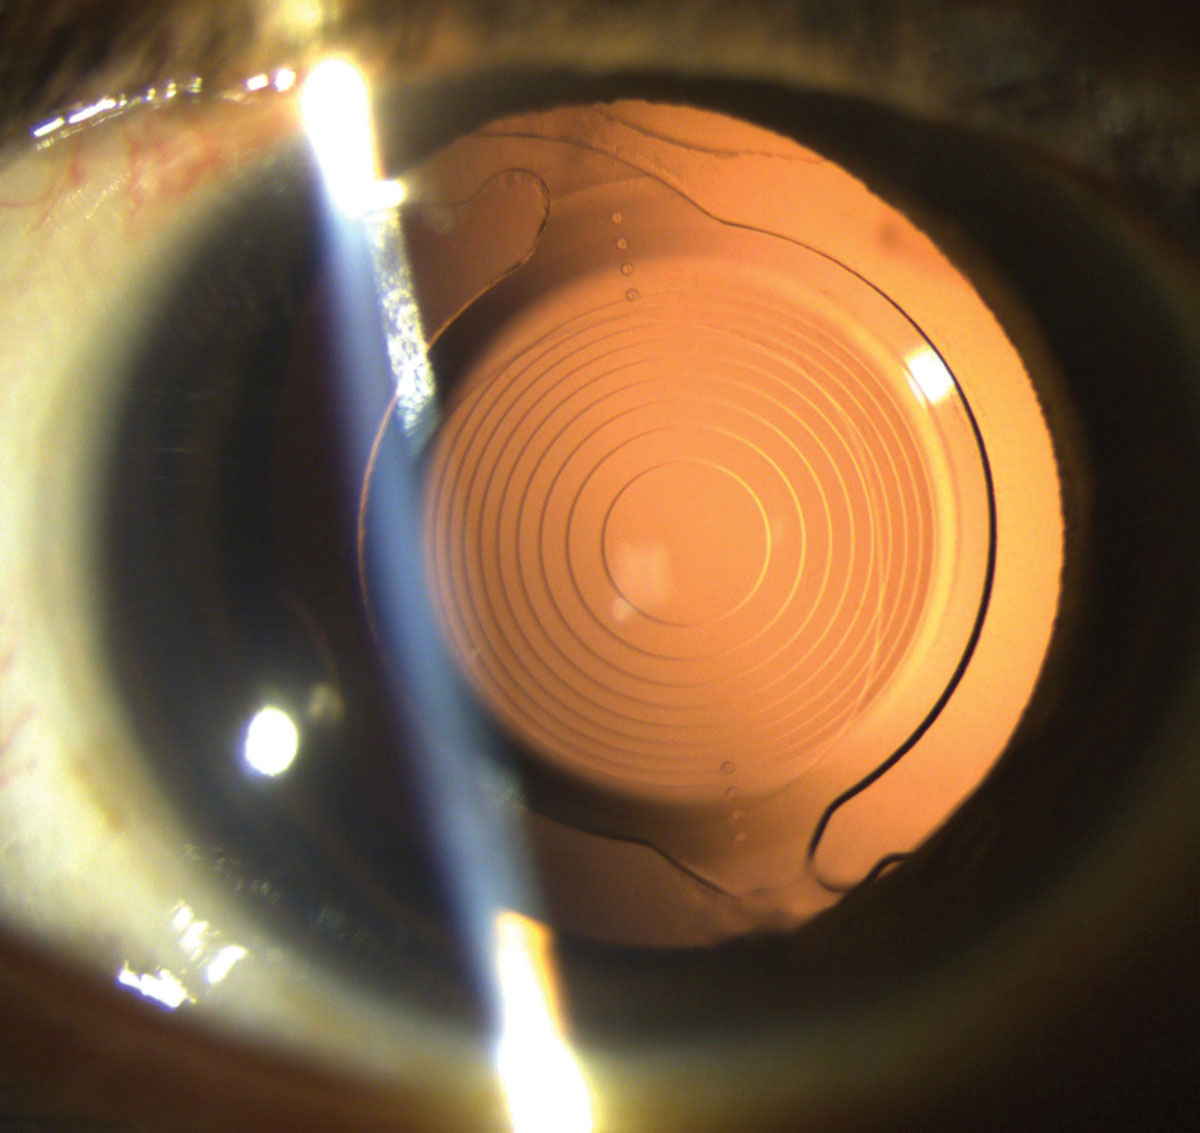 Experts say it’s reasonable to have a “selective” approach to NSAID use after cataract surgery. High-risk patients, such as those with advanced glaucoma, may benefit more from NSAIDs alone to help avoid steroid induced IOP increases.